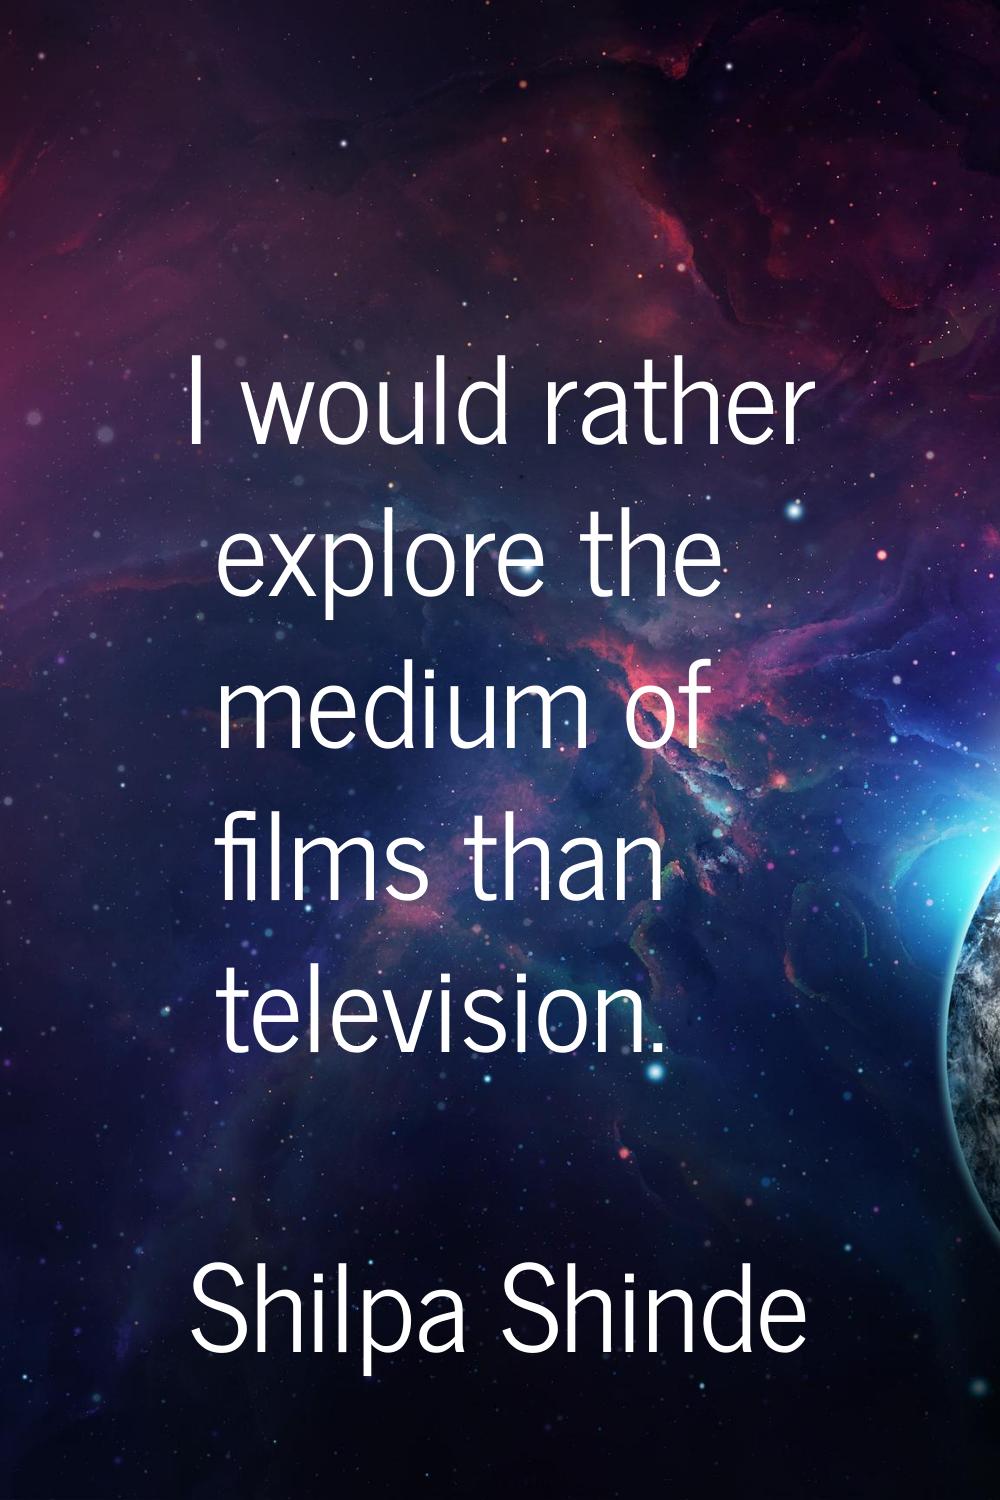 I would rather explore the medium of films than television.